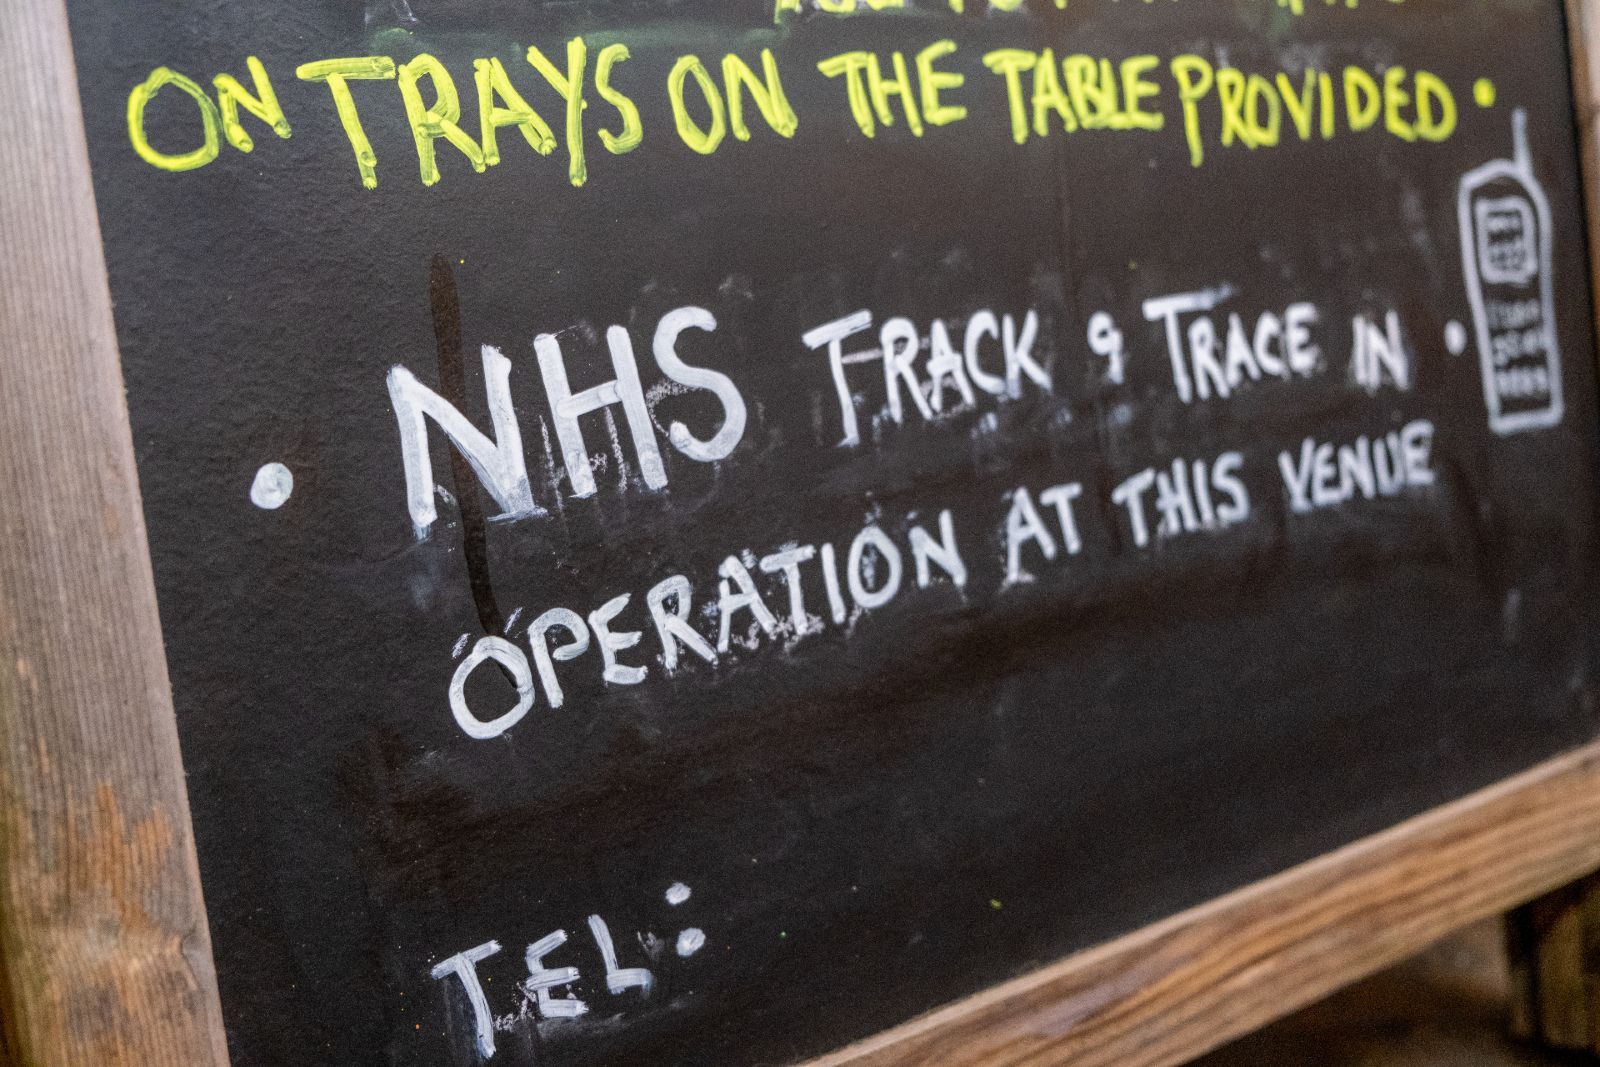 Sign outside UK business reads "NHS track & trace in operation at this venue" - nhs test and trace privacy